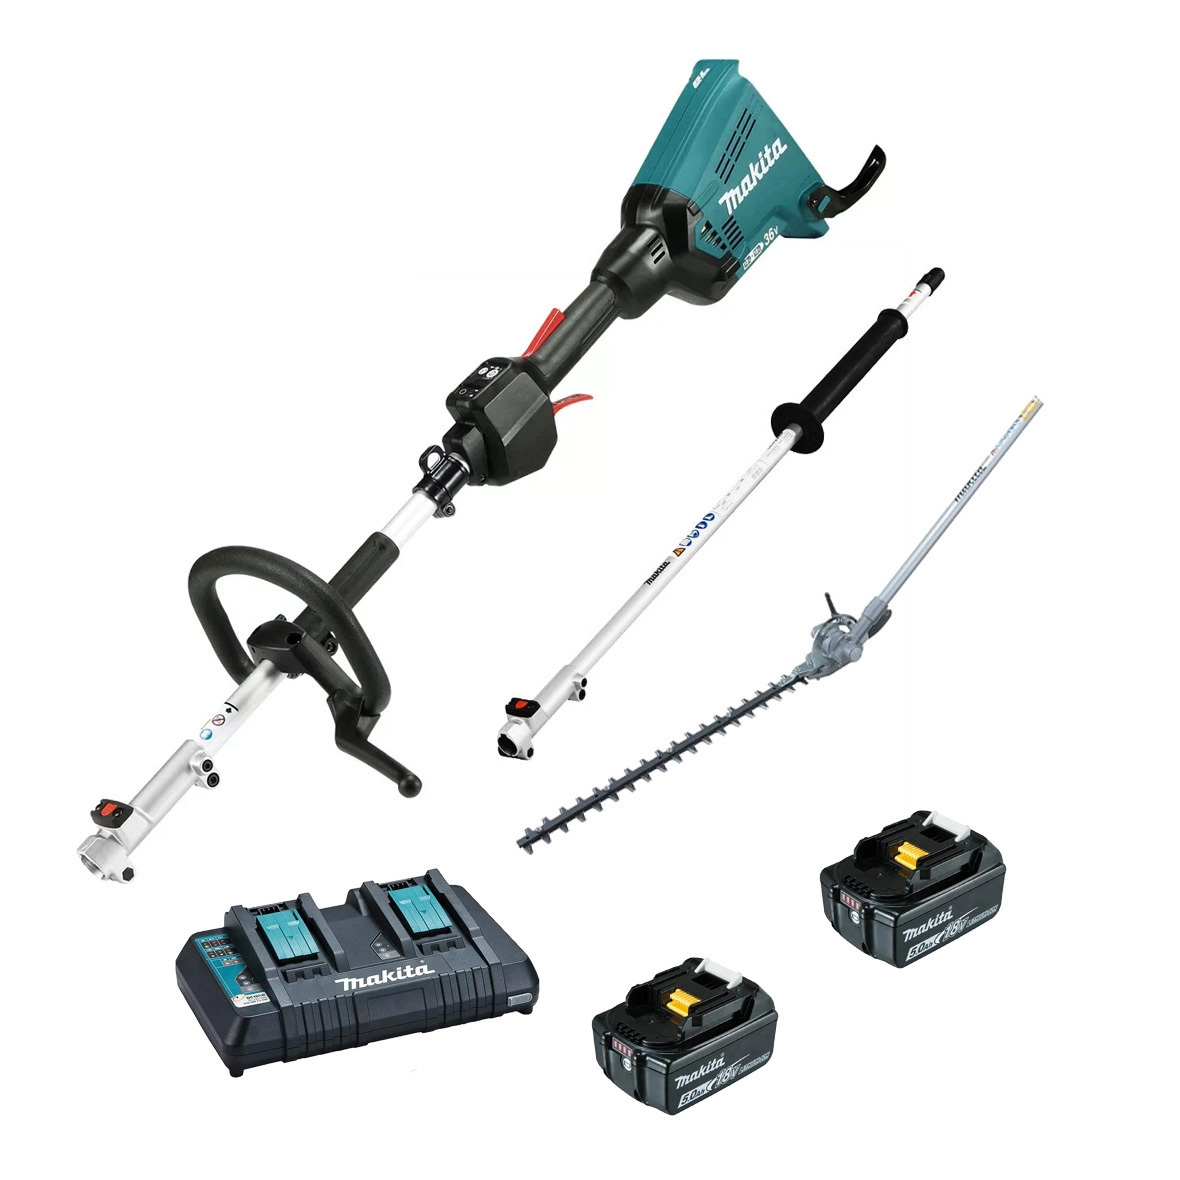 Makita 18Vx2 Brushless Multi-Function Power Head with Attachments 5.0Ah Kit DUX60PHPT2